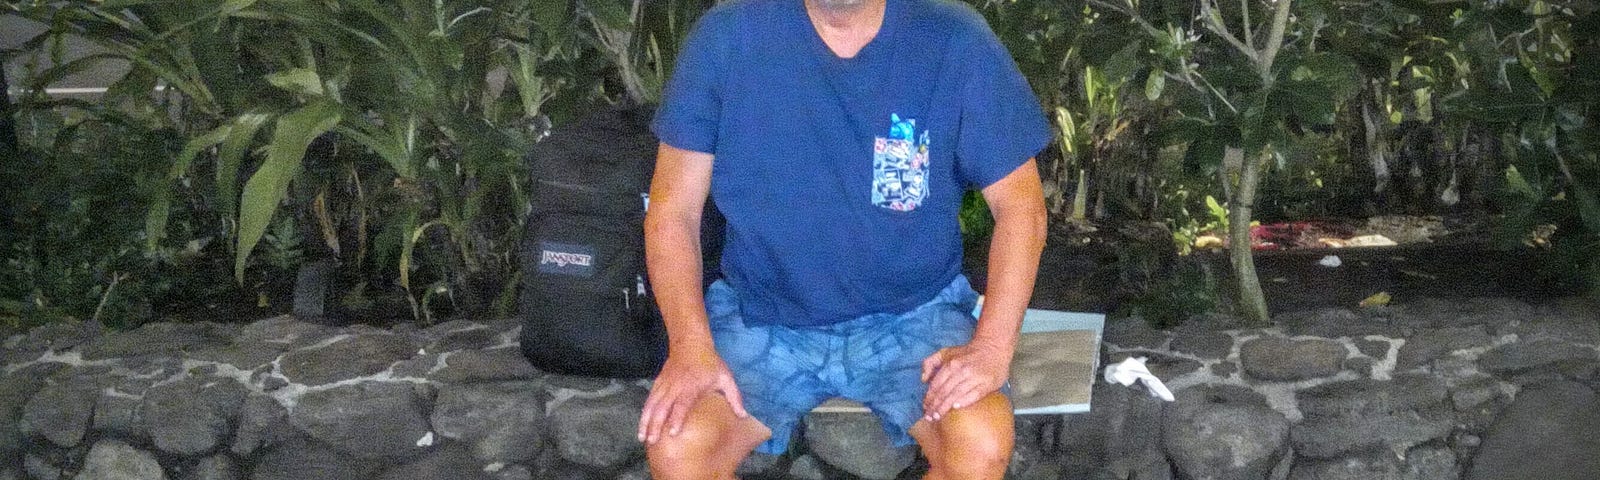 Joe sitting on a stone wall in Waikiki — Panhandling for Cannabis when I was Homeless